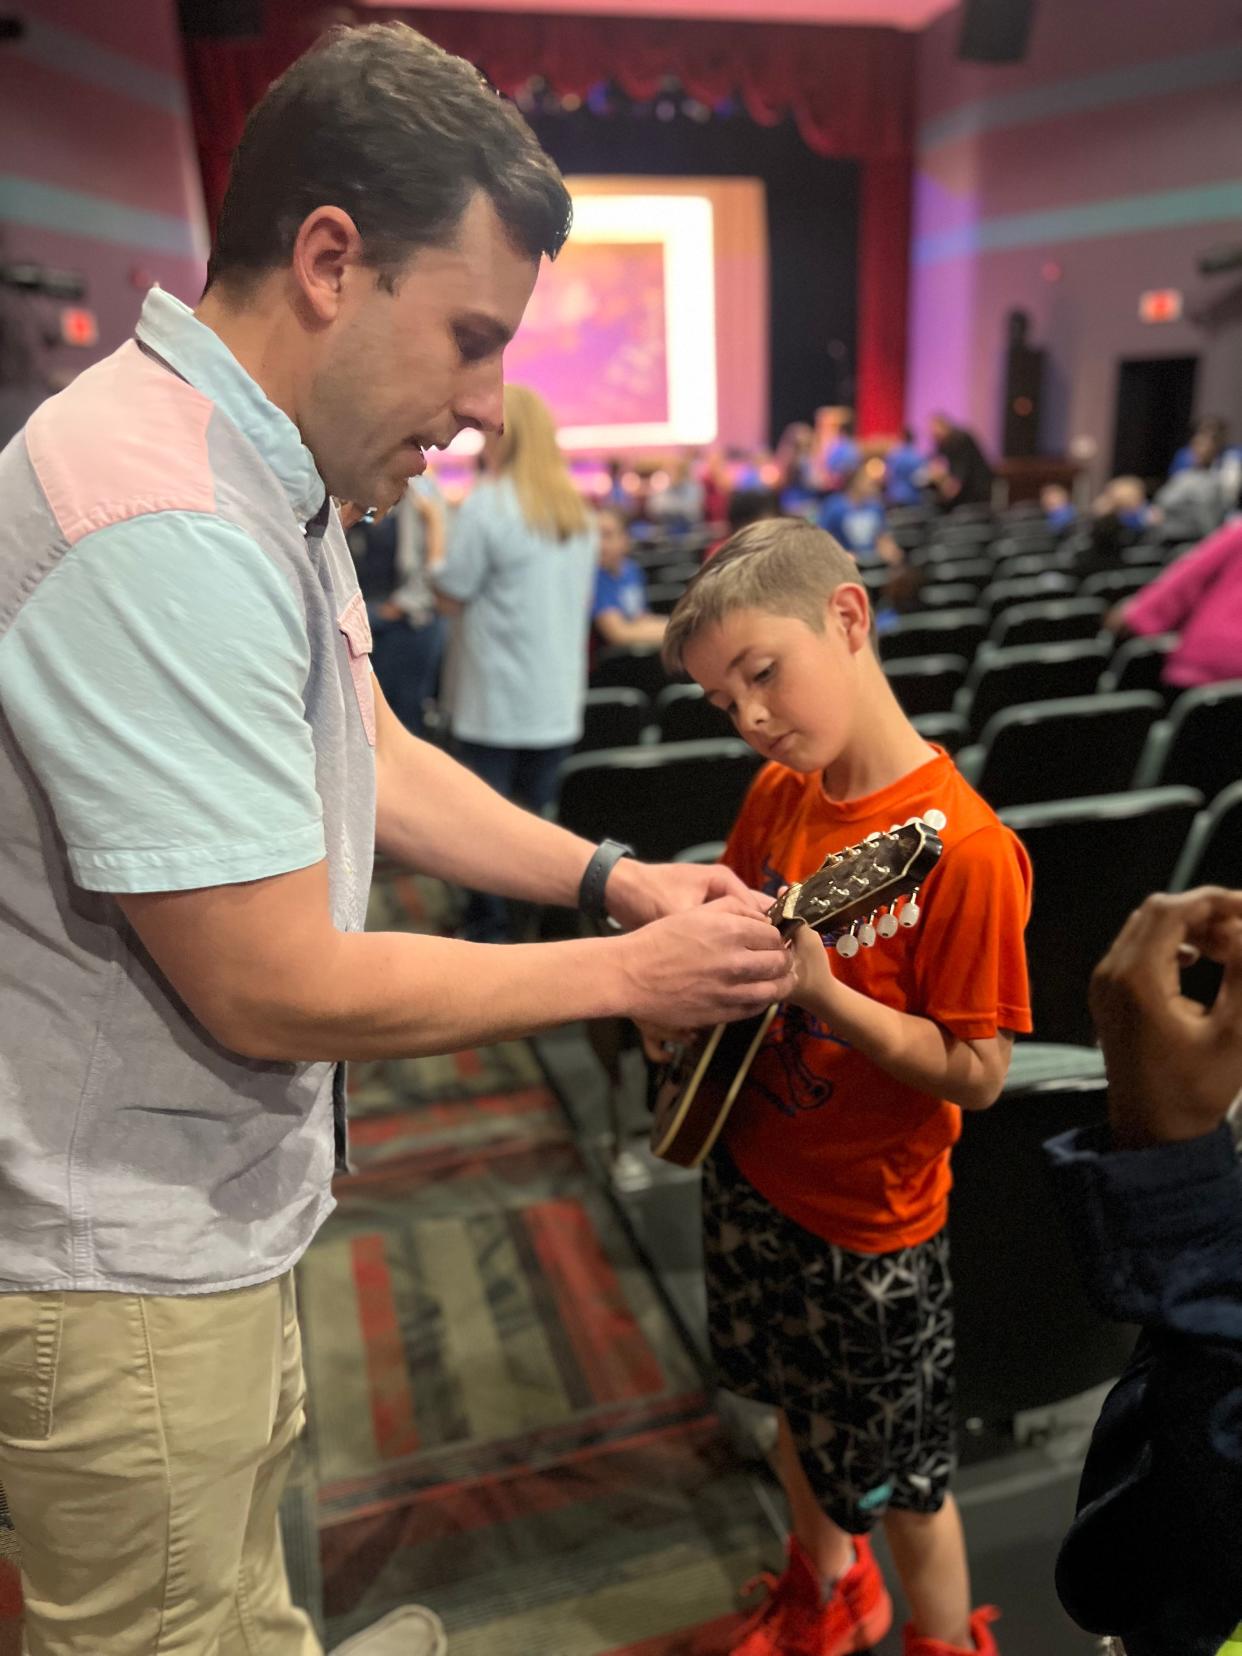 Earl Scruggs Center Assistant Director Zach Dressel shows a student how to hold and play a mandolin during the Bluegrass Ambassadors program at the Don Gibson Theater on Tuesday.